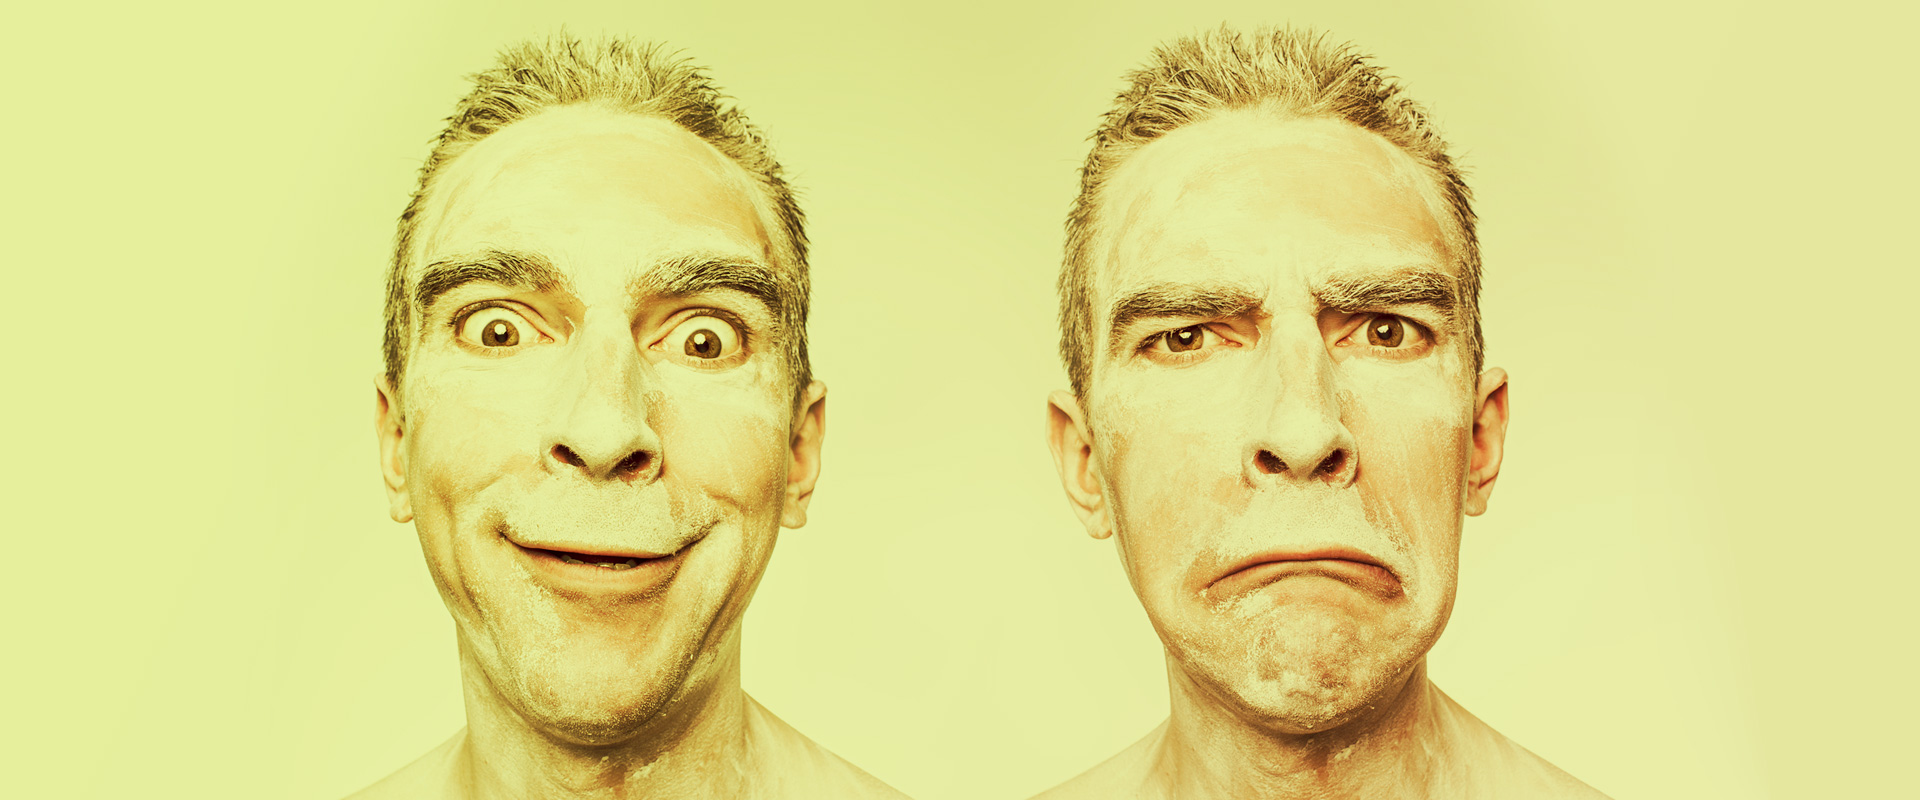 Facial man expression - happy vs angry - famille vs travail